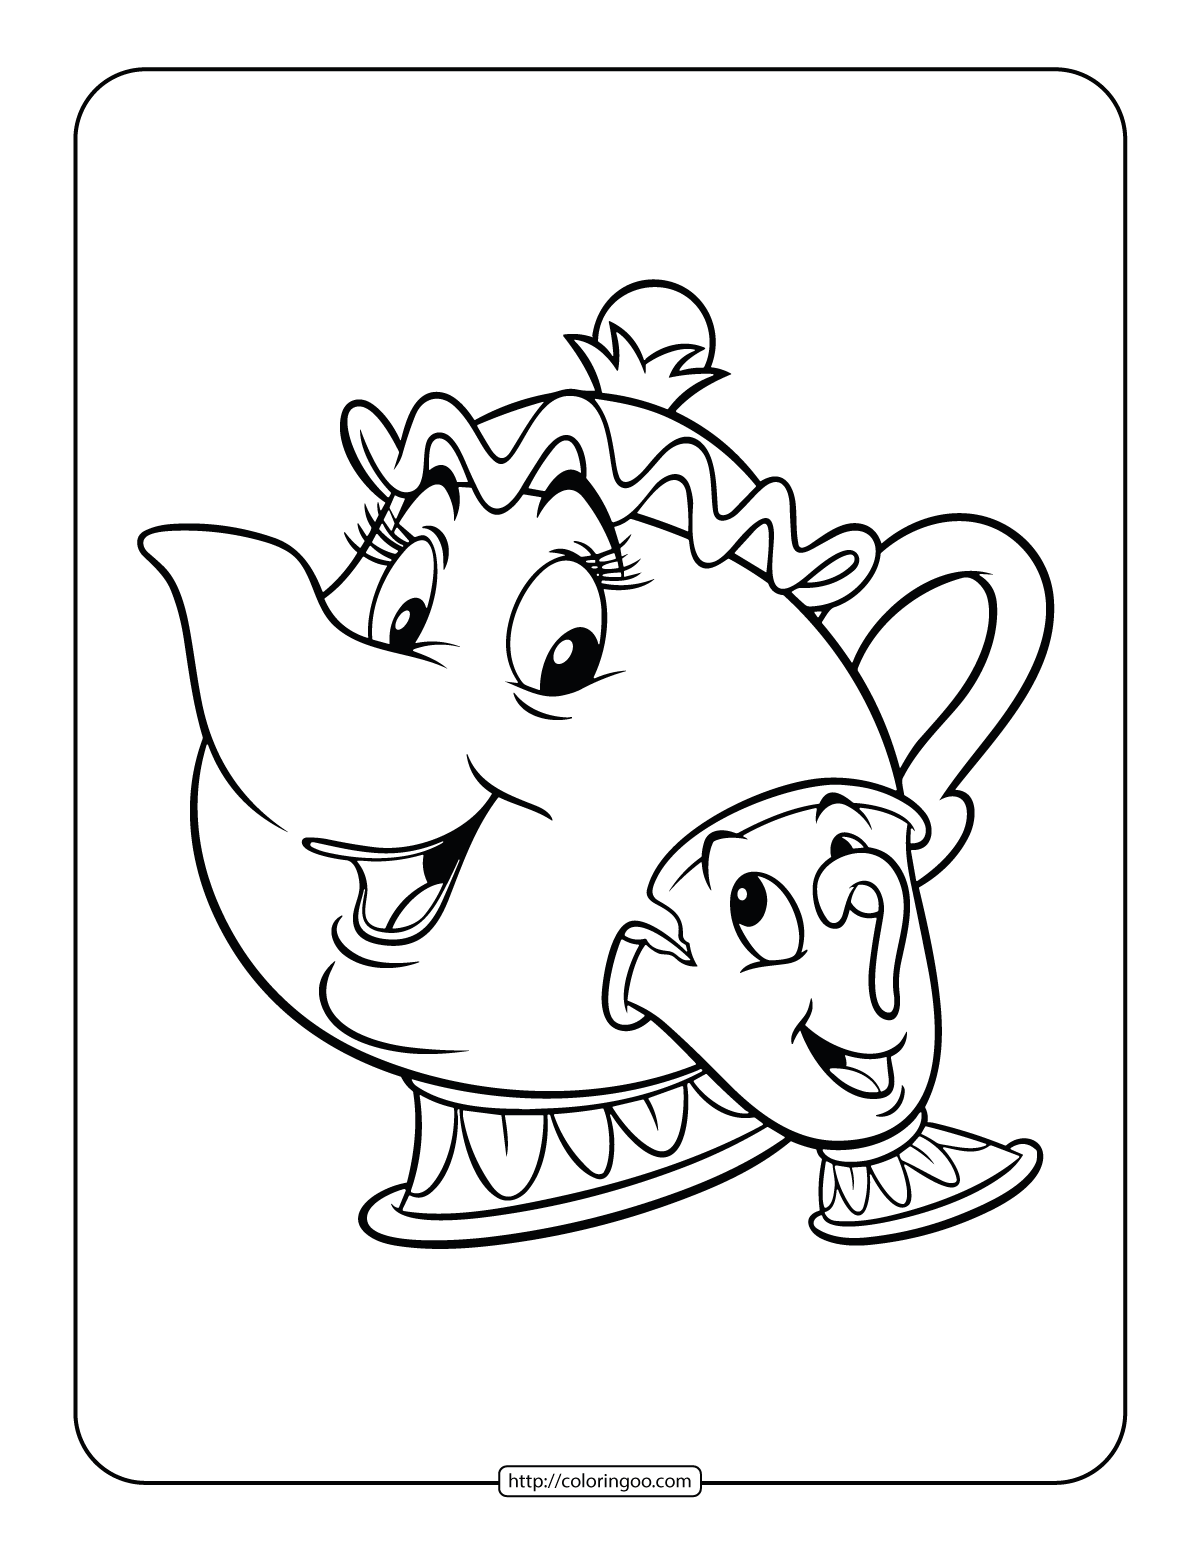 mrs potts and chip coloring page